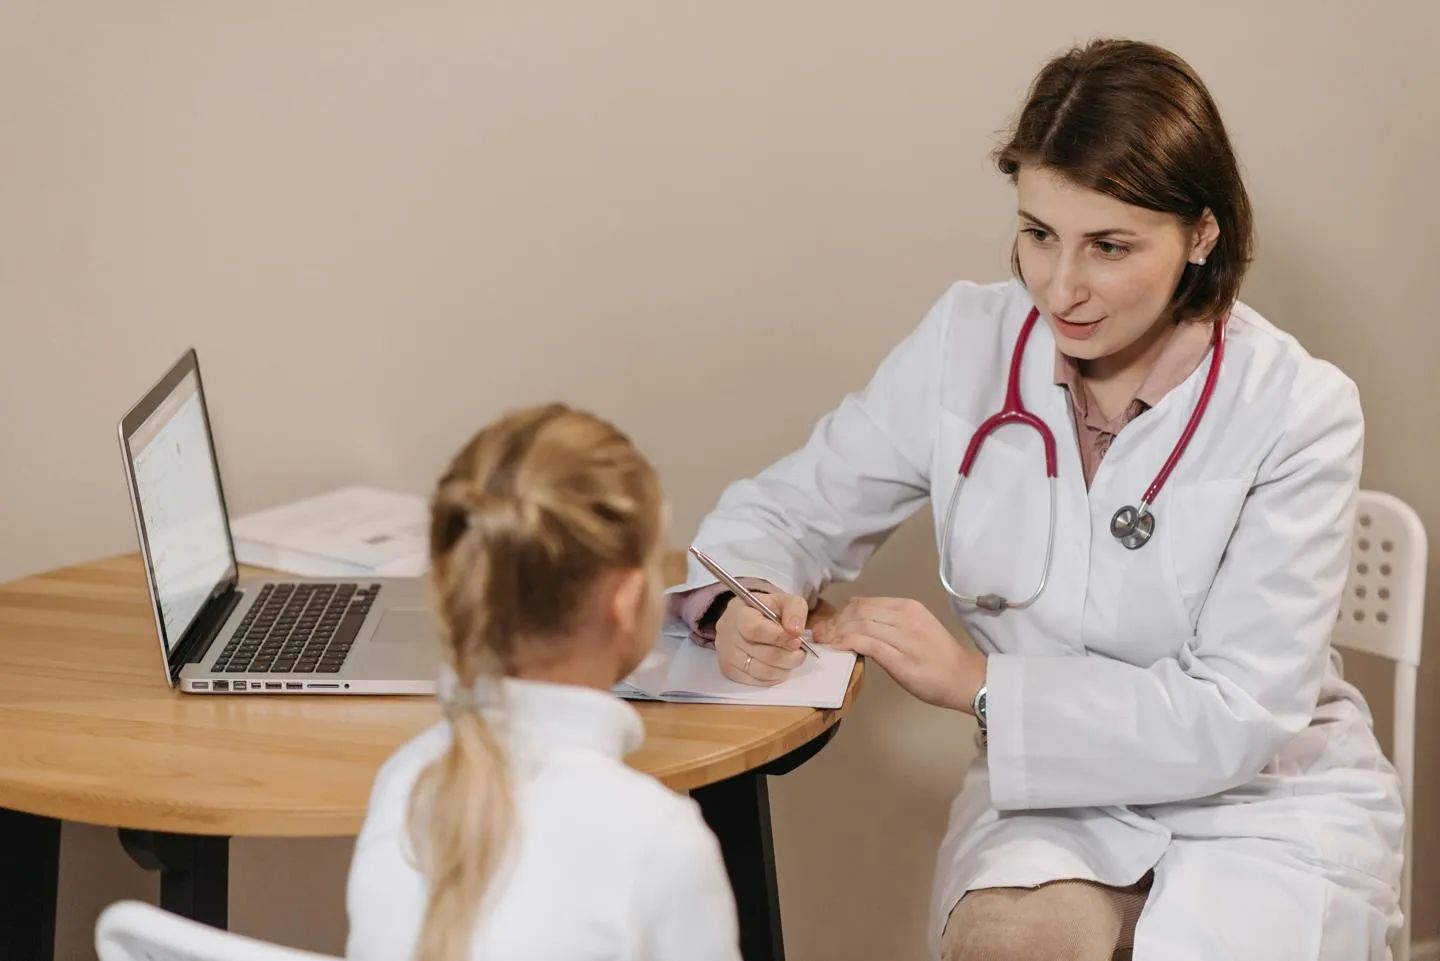 Doctor wearing white clinical coat talking to young girl